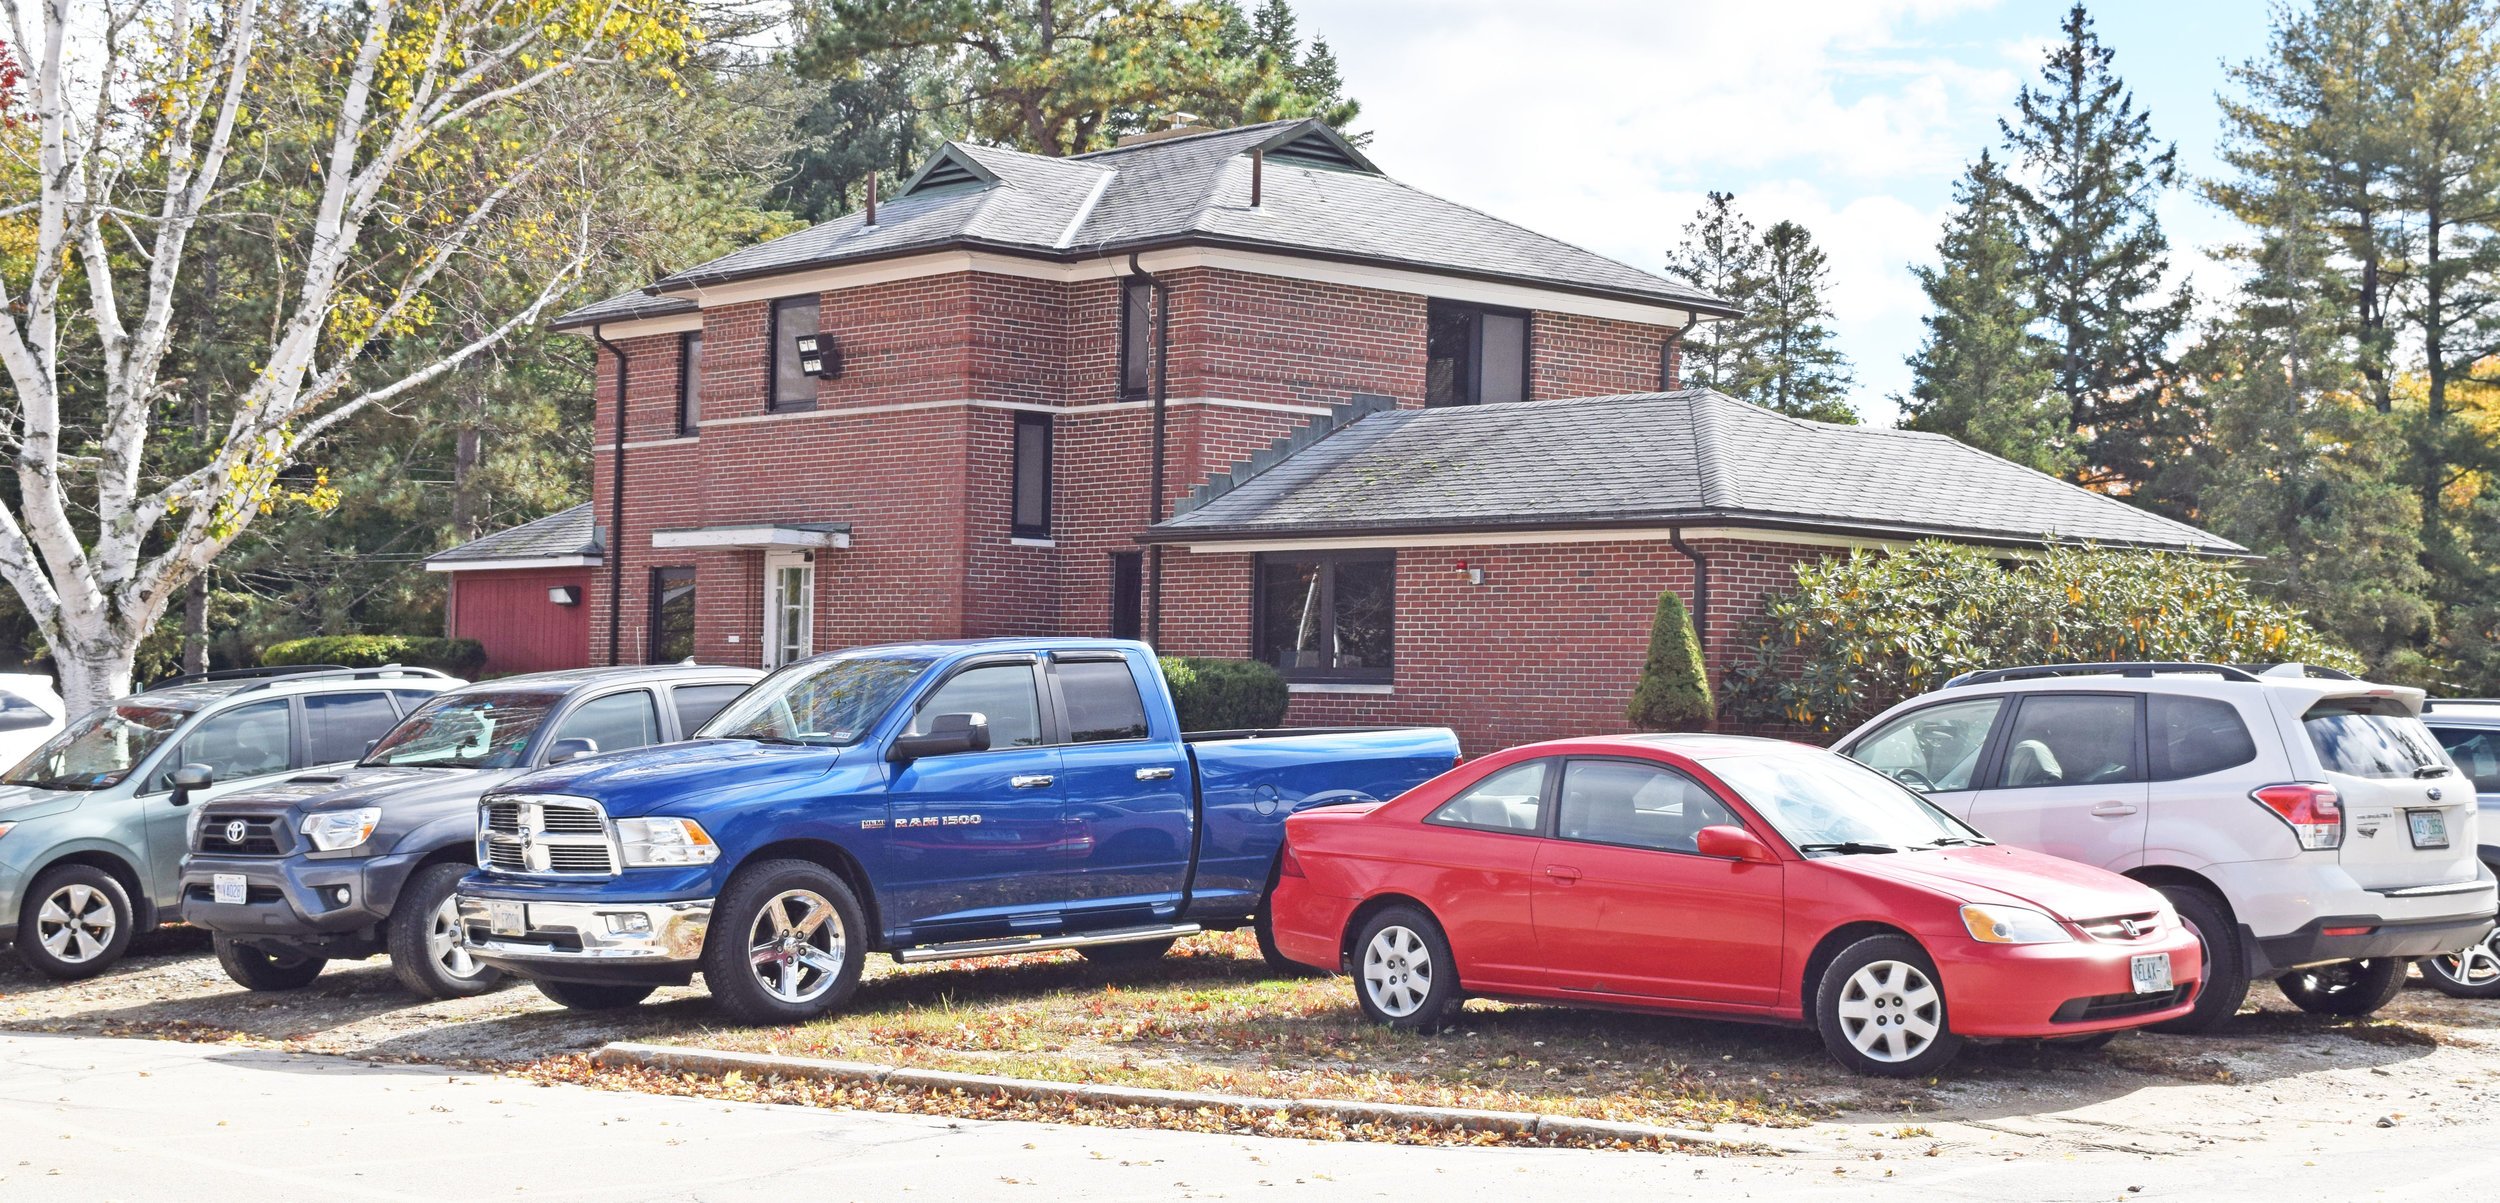 VAMC Managers Residence - front with cars.jpg